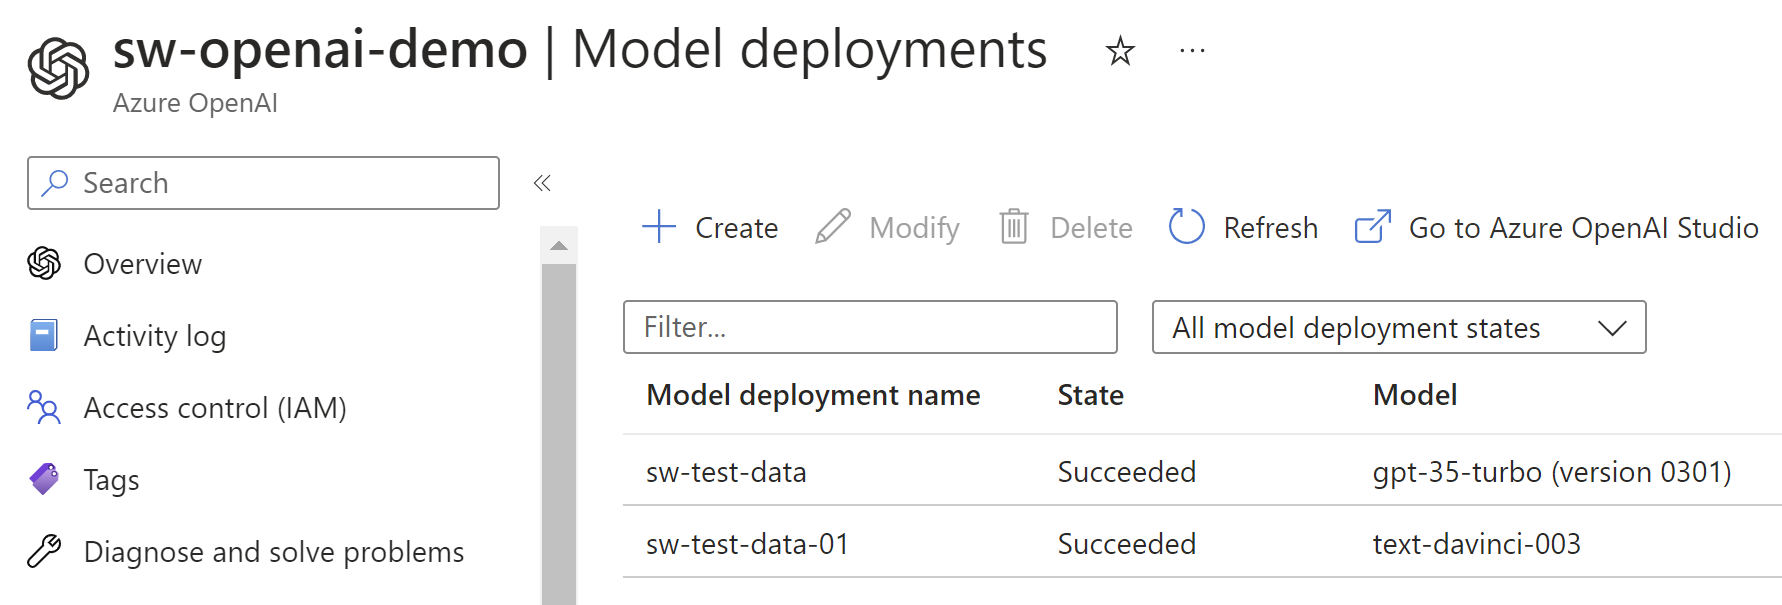 View of deployed models in my Azure OpenAI service